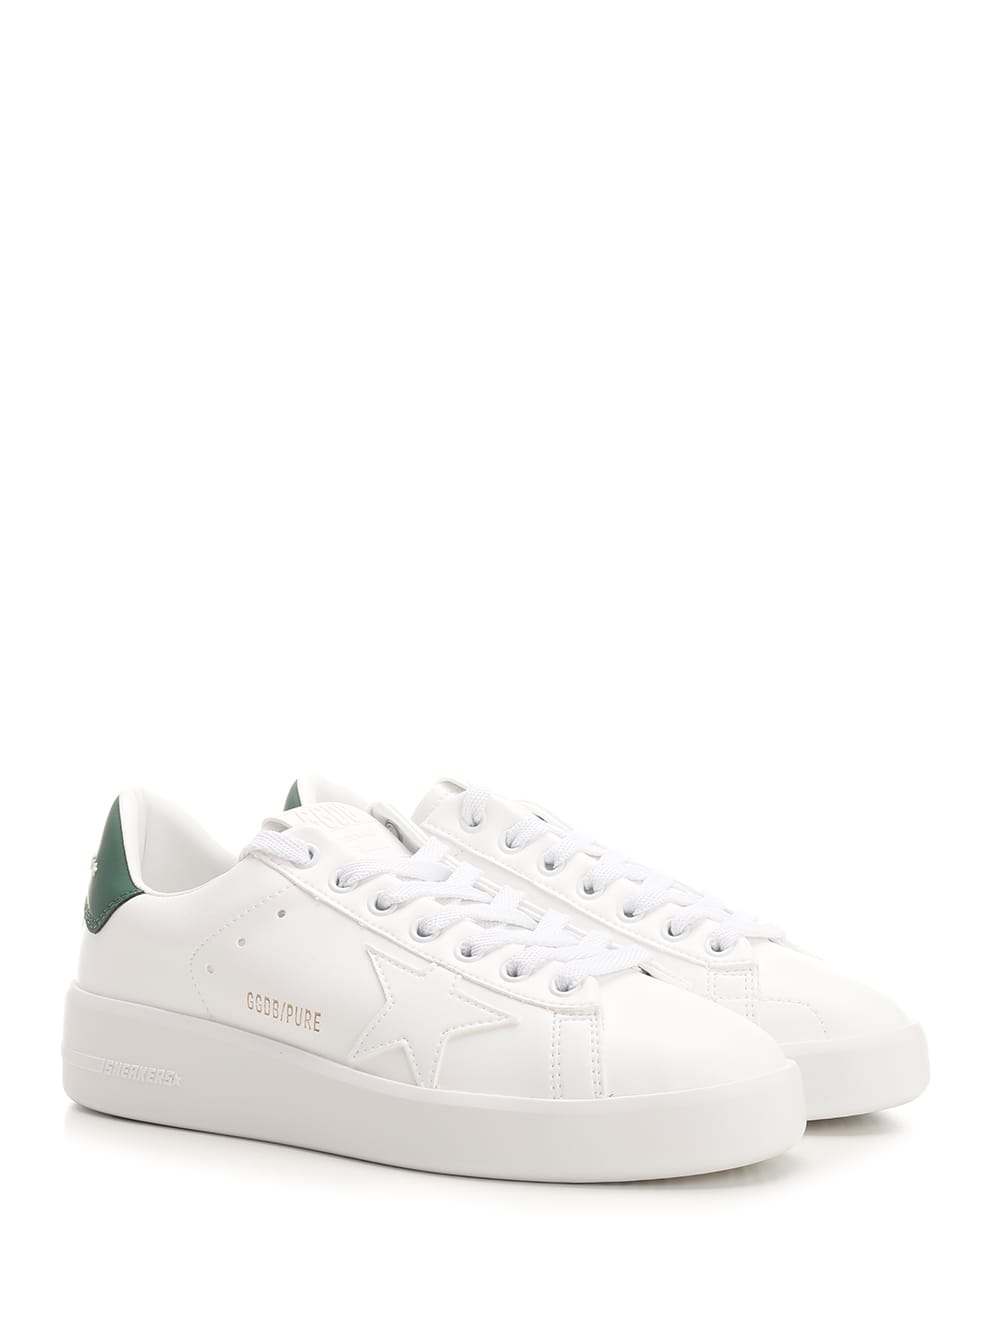 Shop Golden Goose Pure Star Sneakers In White/green